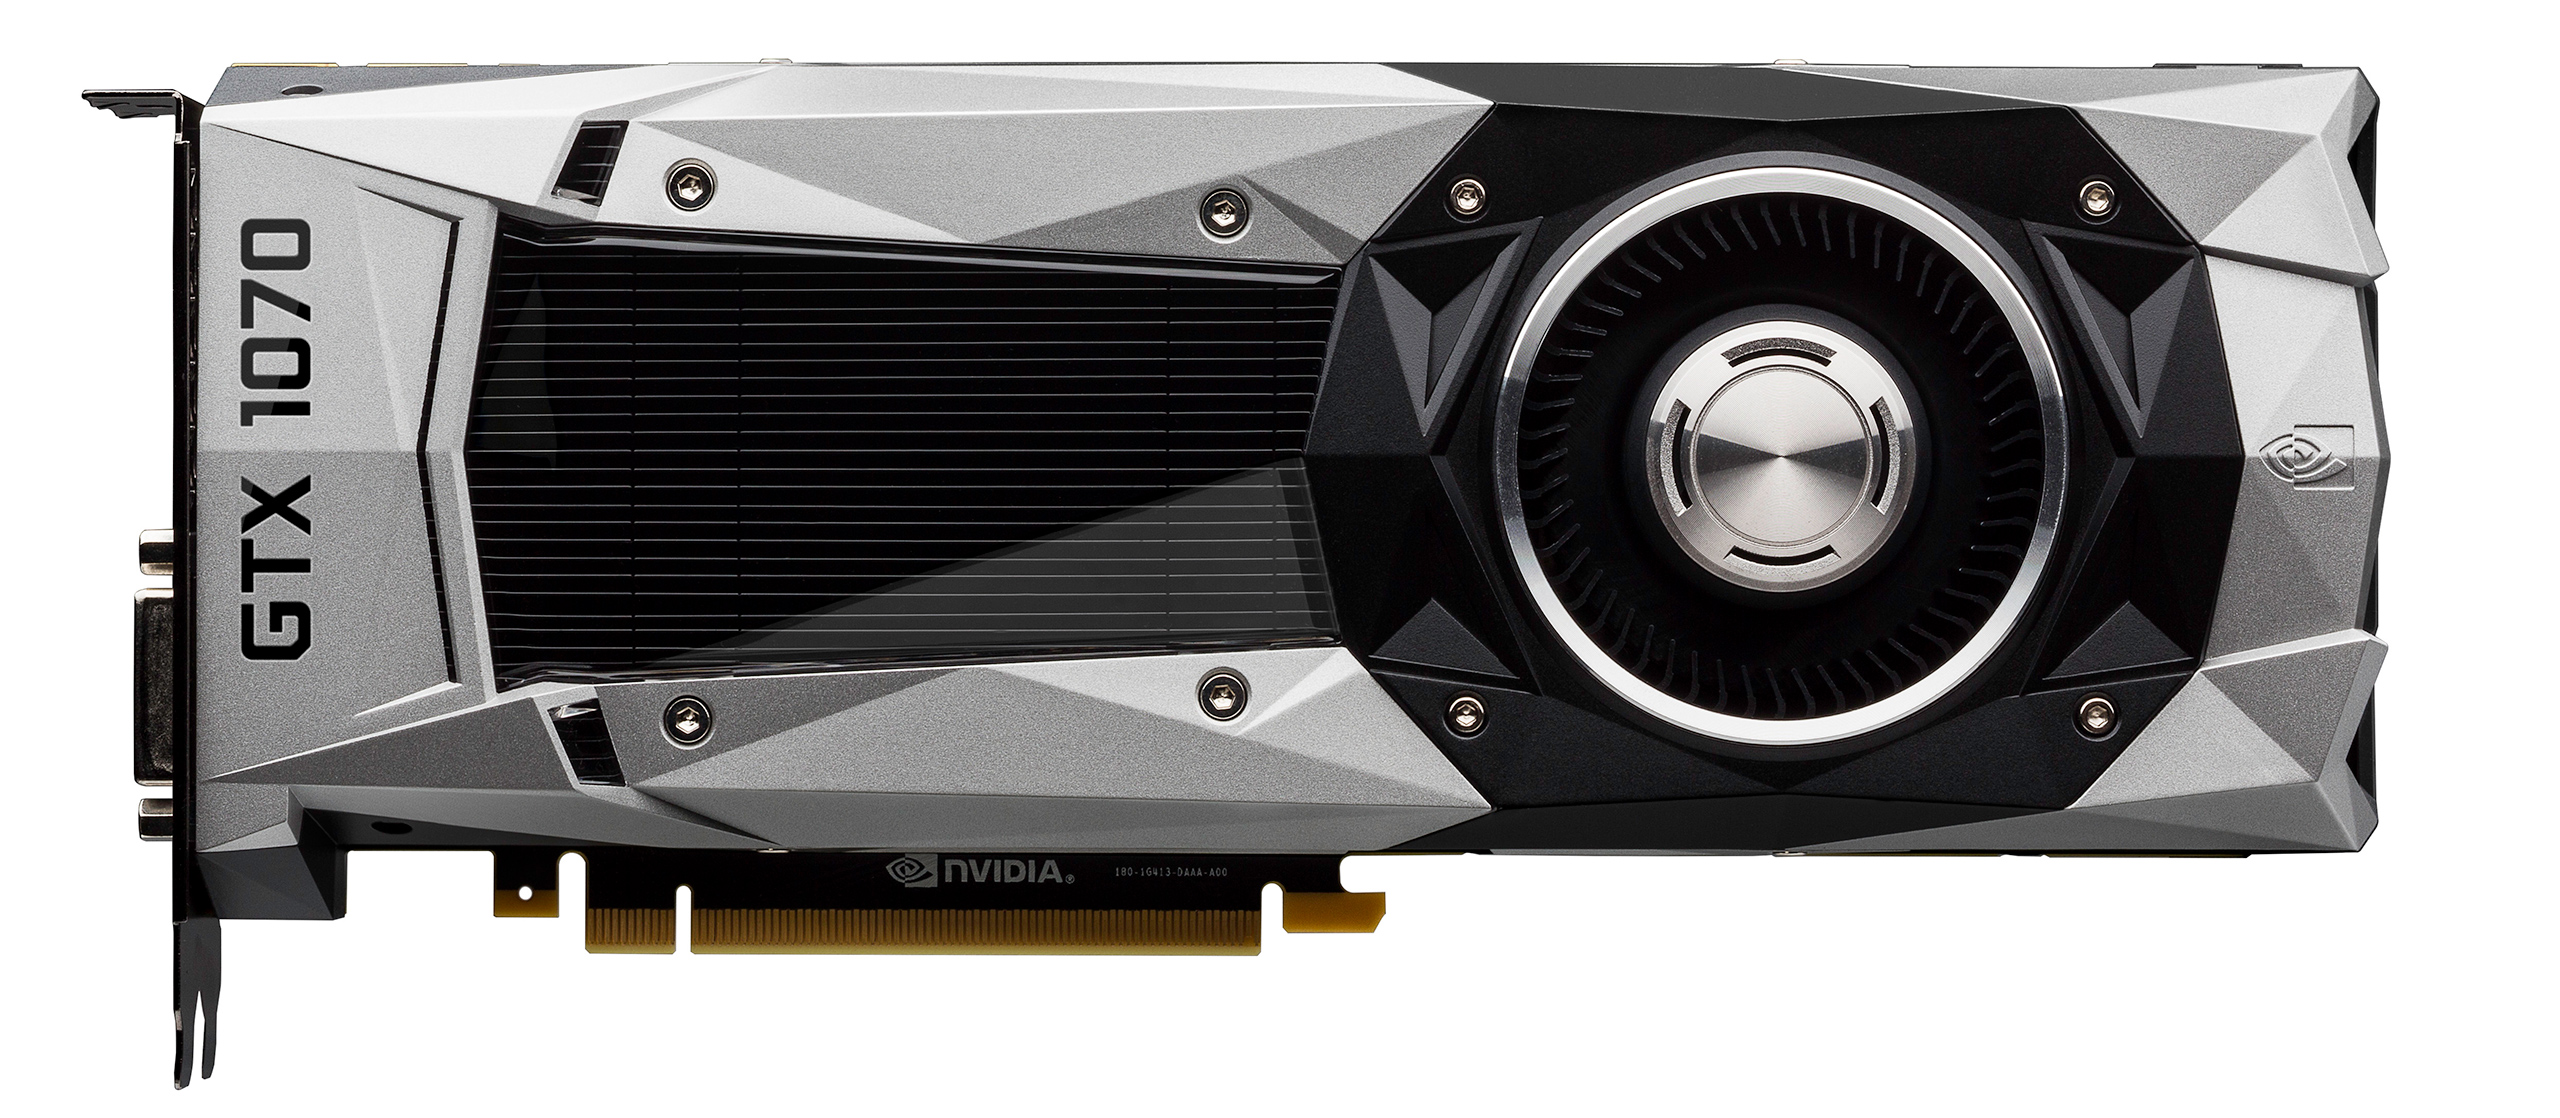 The best graphics card FGR*